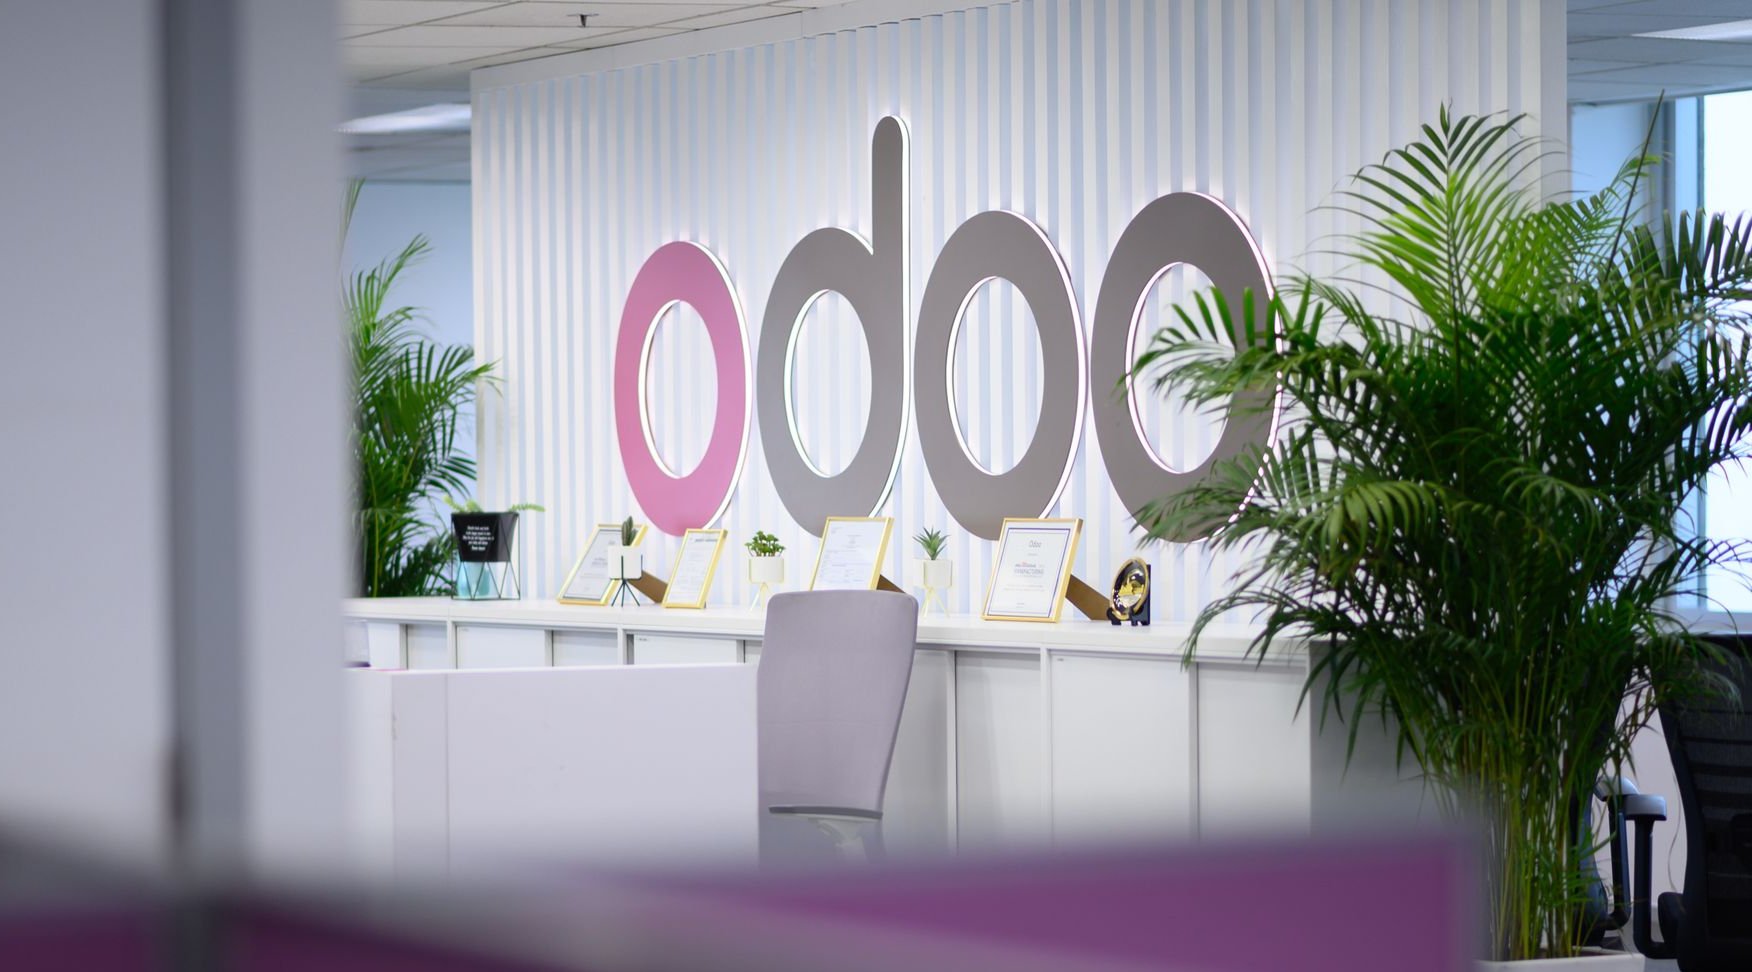 17-facts-about-odoo